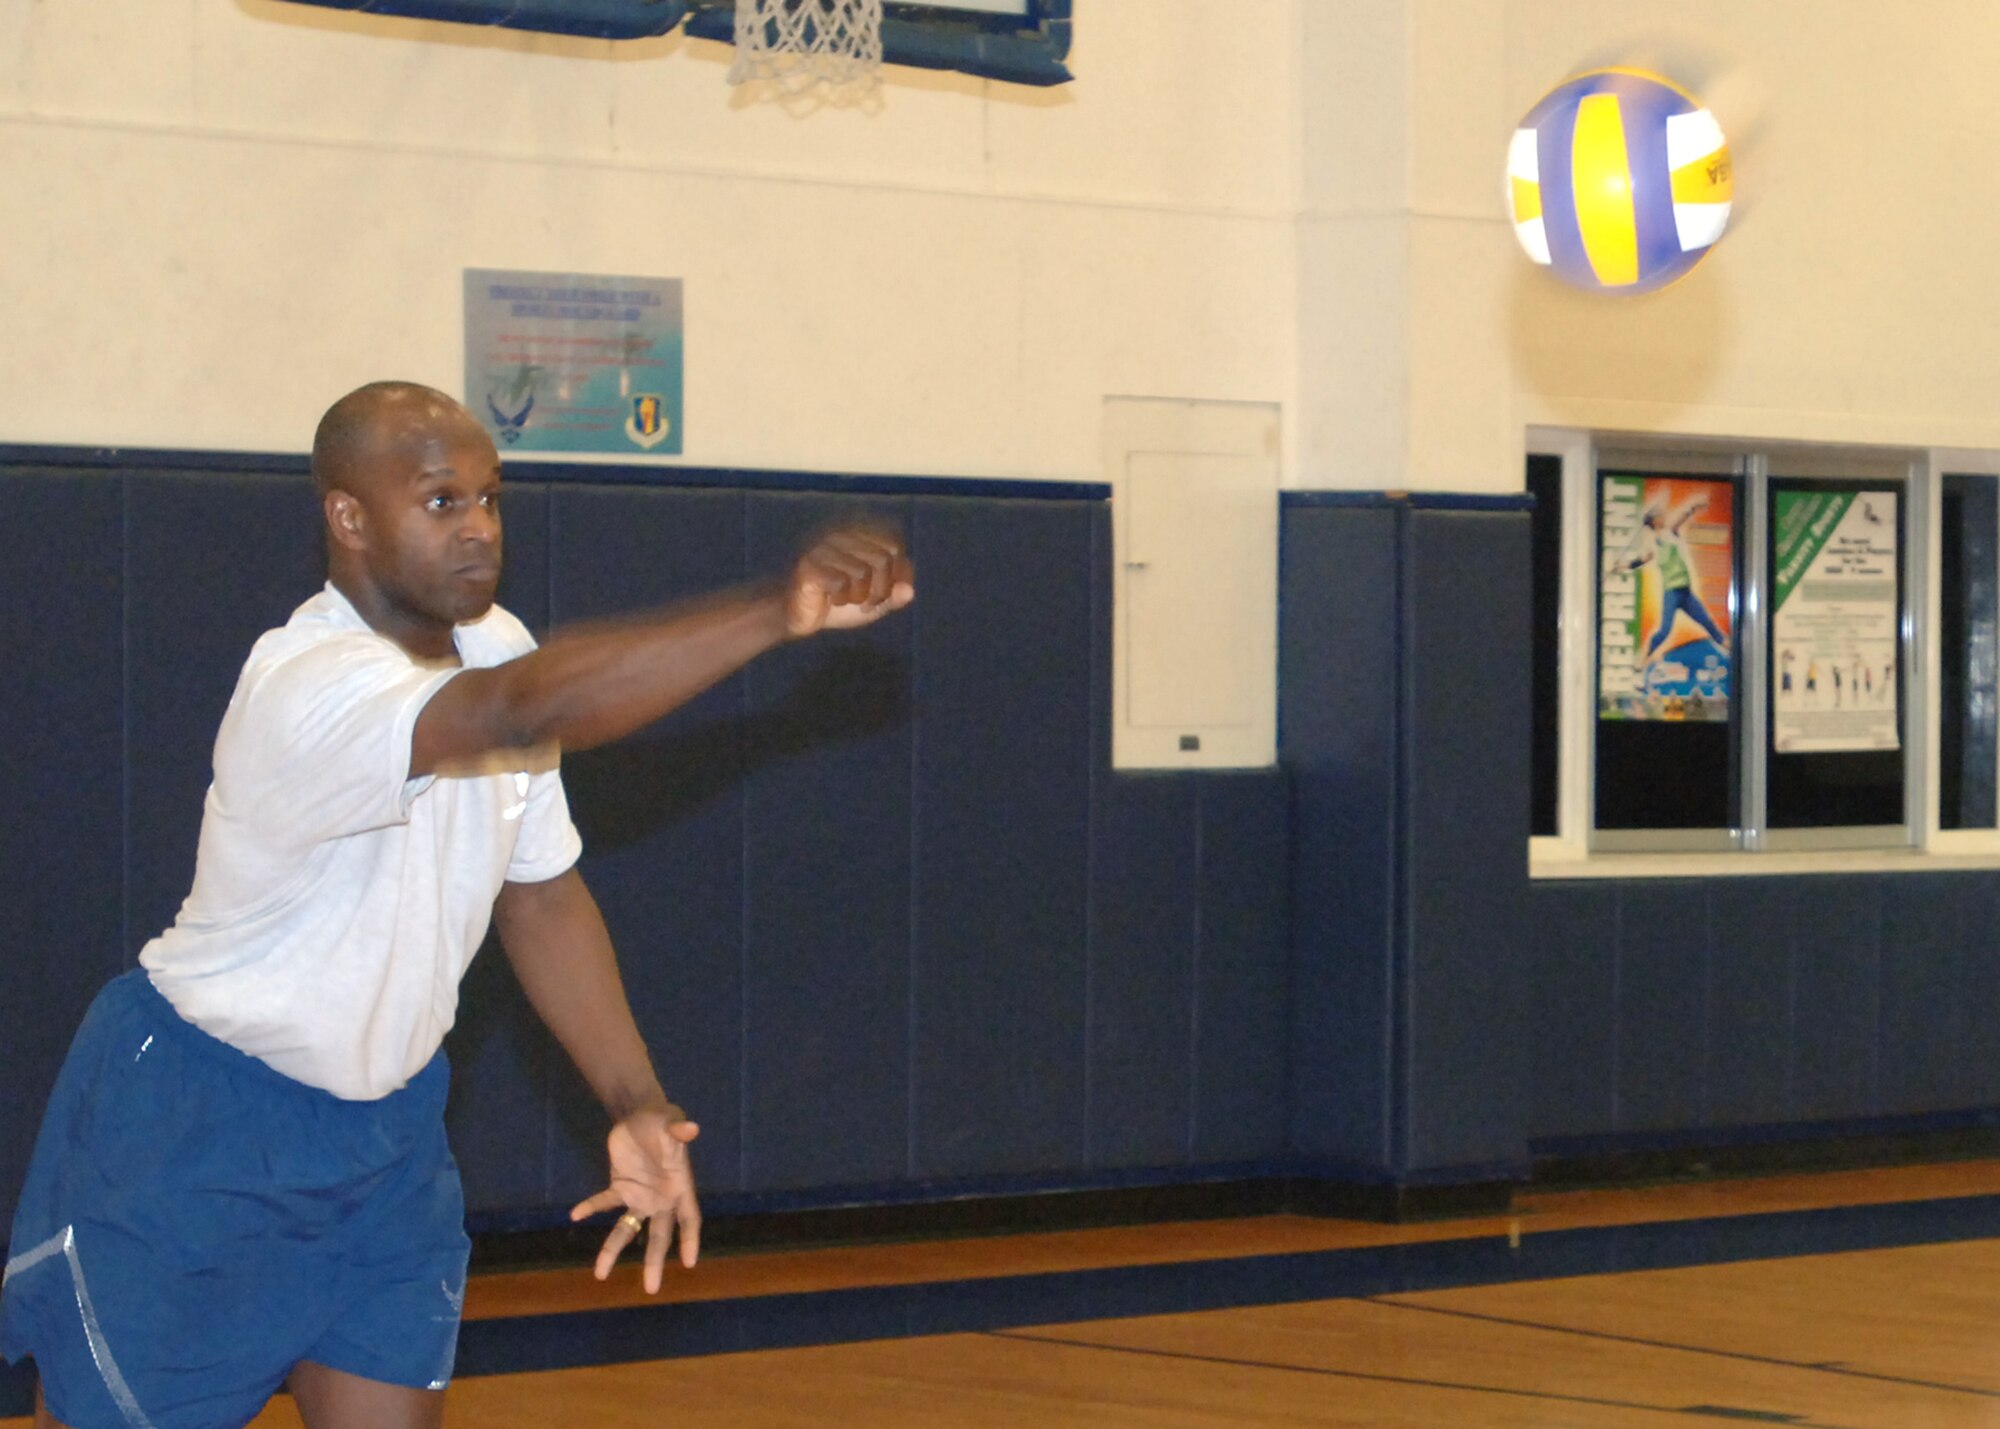 MISAWA AIR BASE, Japan -- Col. Cedric George, 35th Maintenance Group commander, serves the ball during the Eagles vs. Chiefs volleyball game at the Potter Fitness Center, March 14, 2008.  The hard-fought series of games left the Chiefs with a well-earned victory.  (U.S. Air Force photo by Senior Airman Robert Barnett)